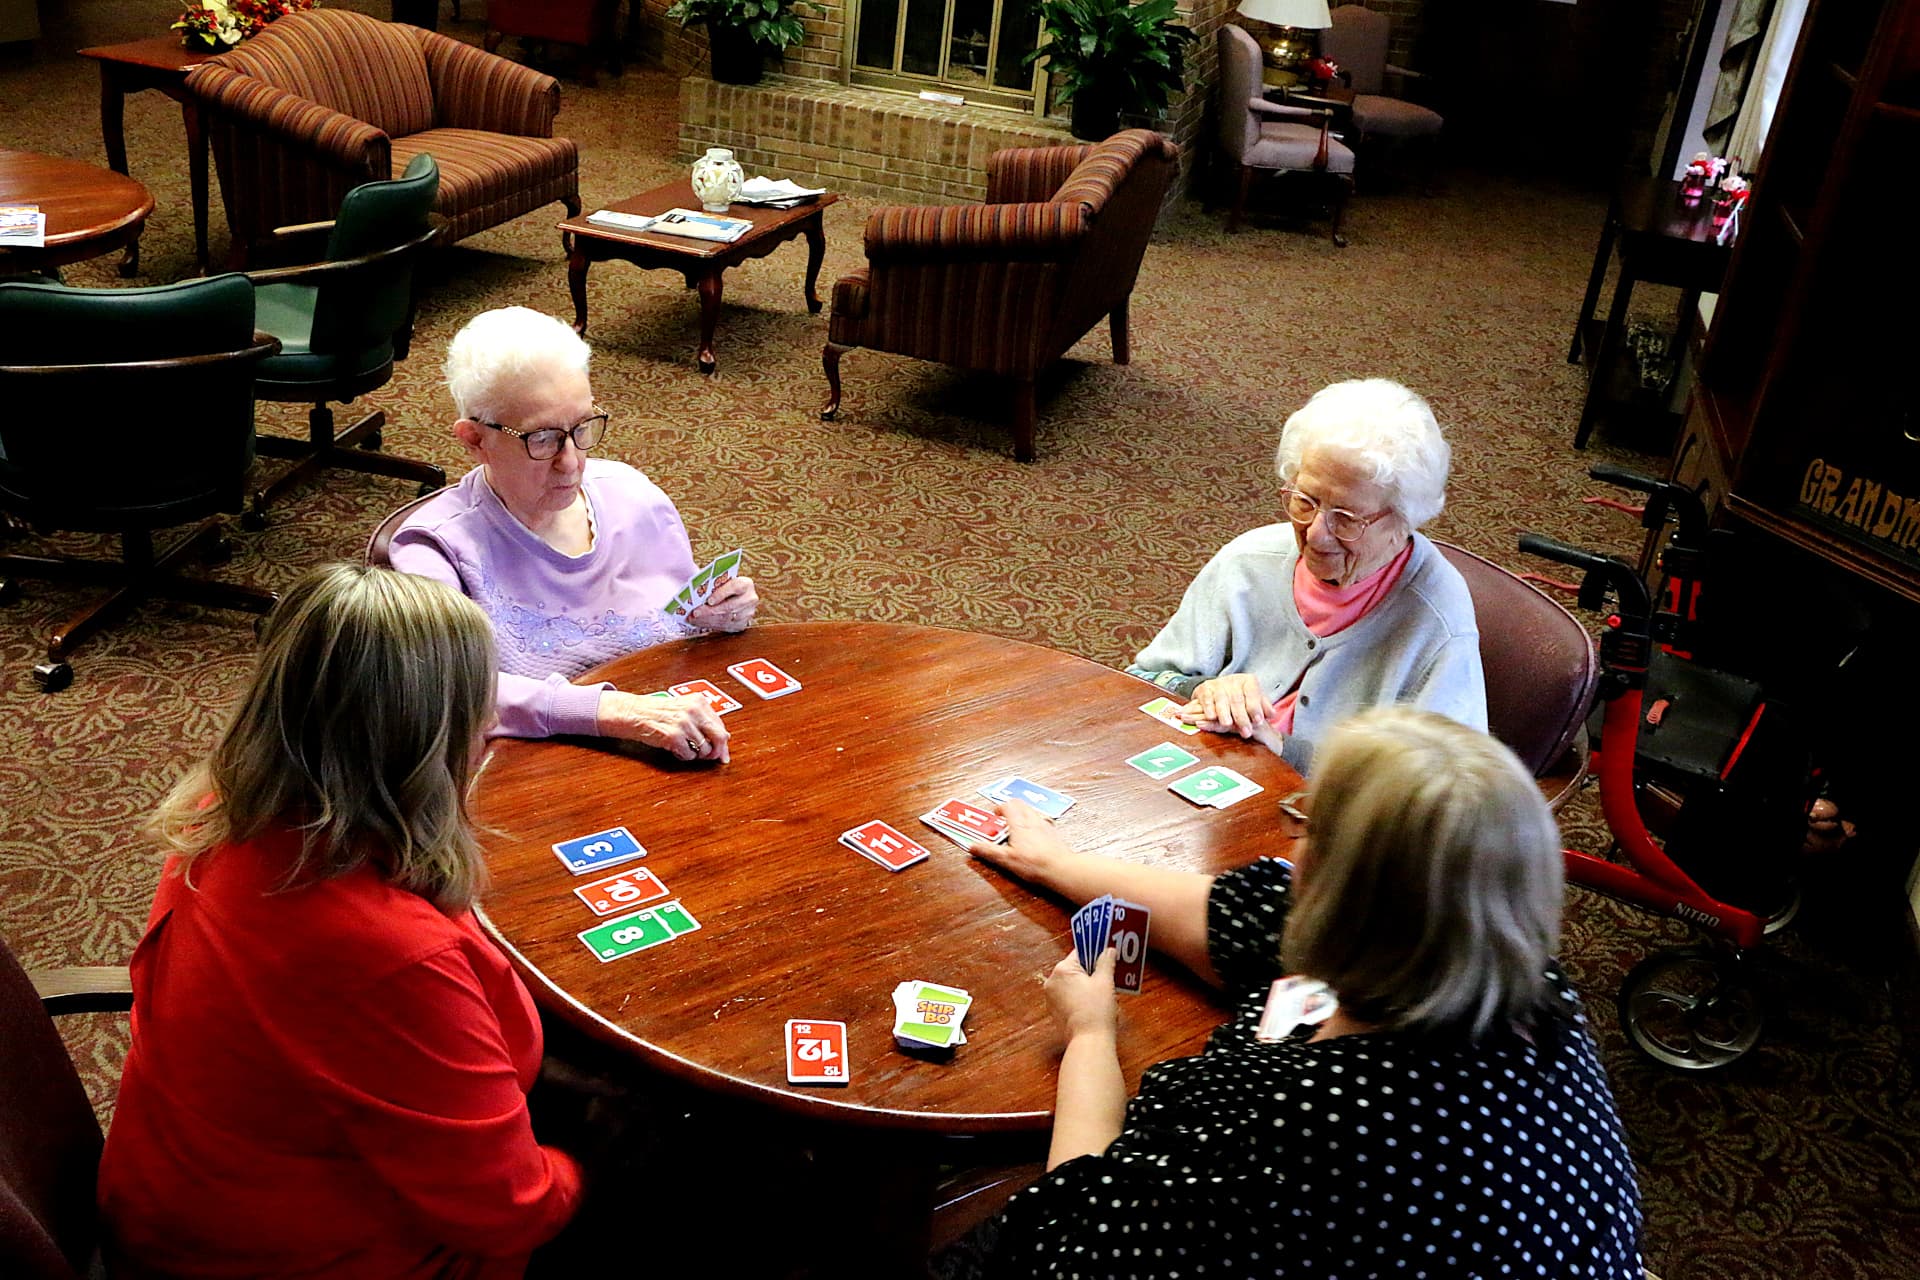 Group of residents and staff playing cards at table